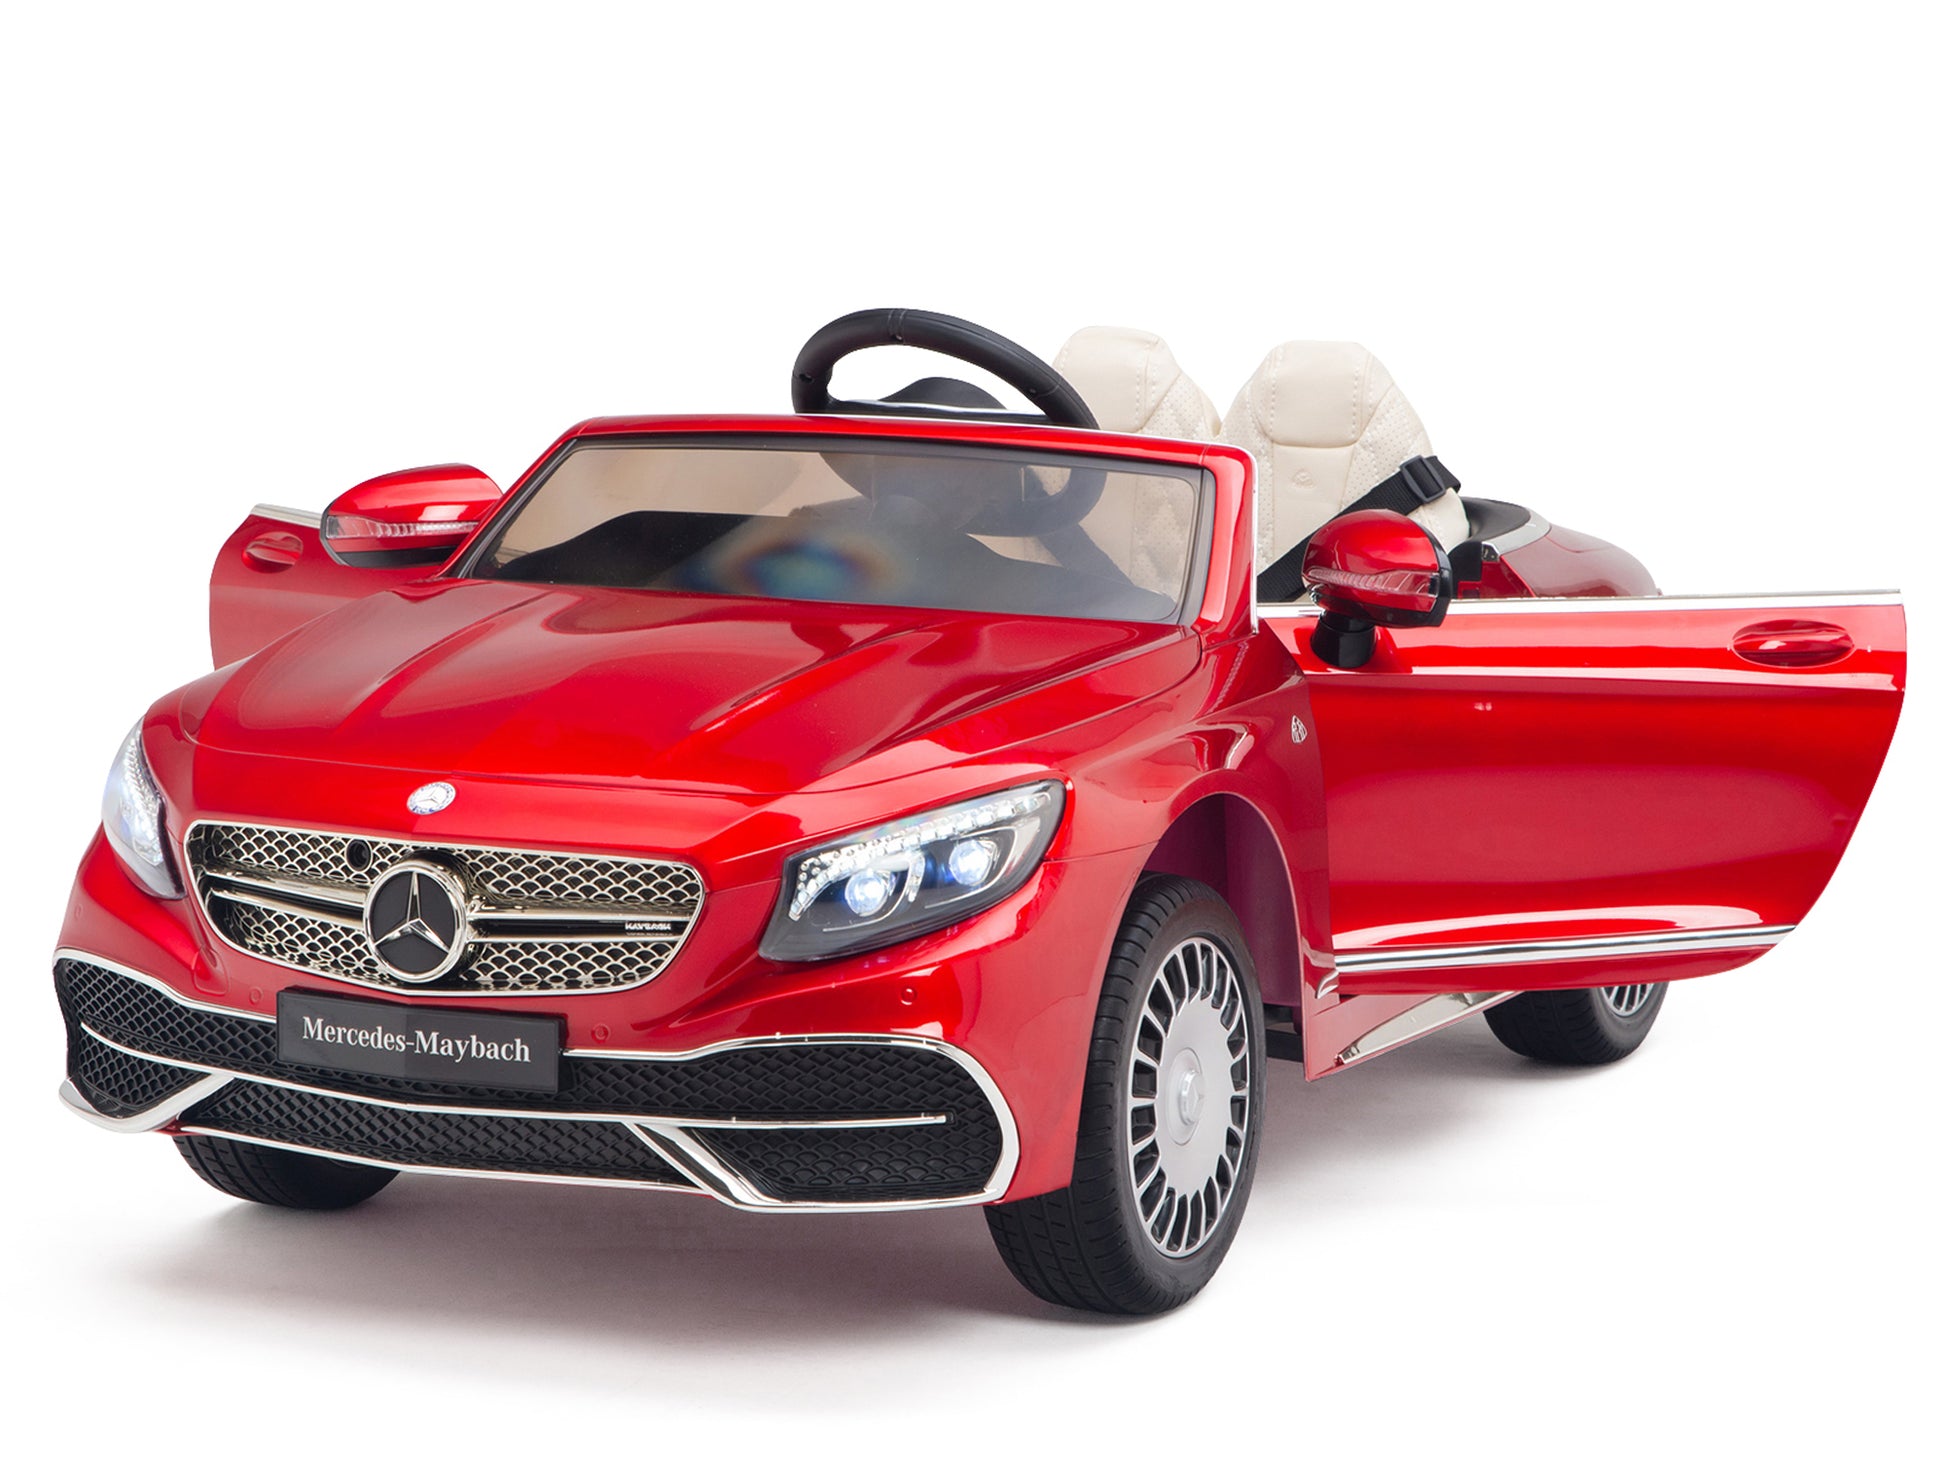 Mercedes Maybach Remote Control Ride On Truck for Boys & Girls from Big Toys Direct - Red